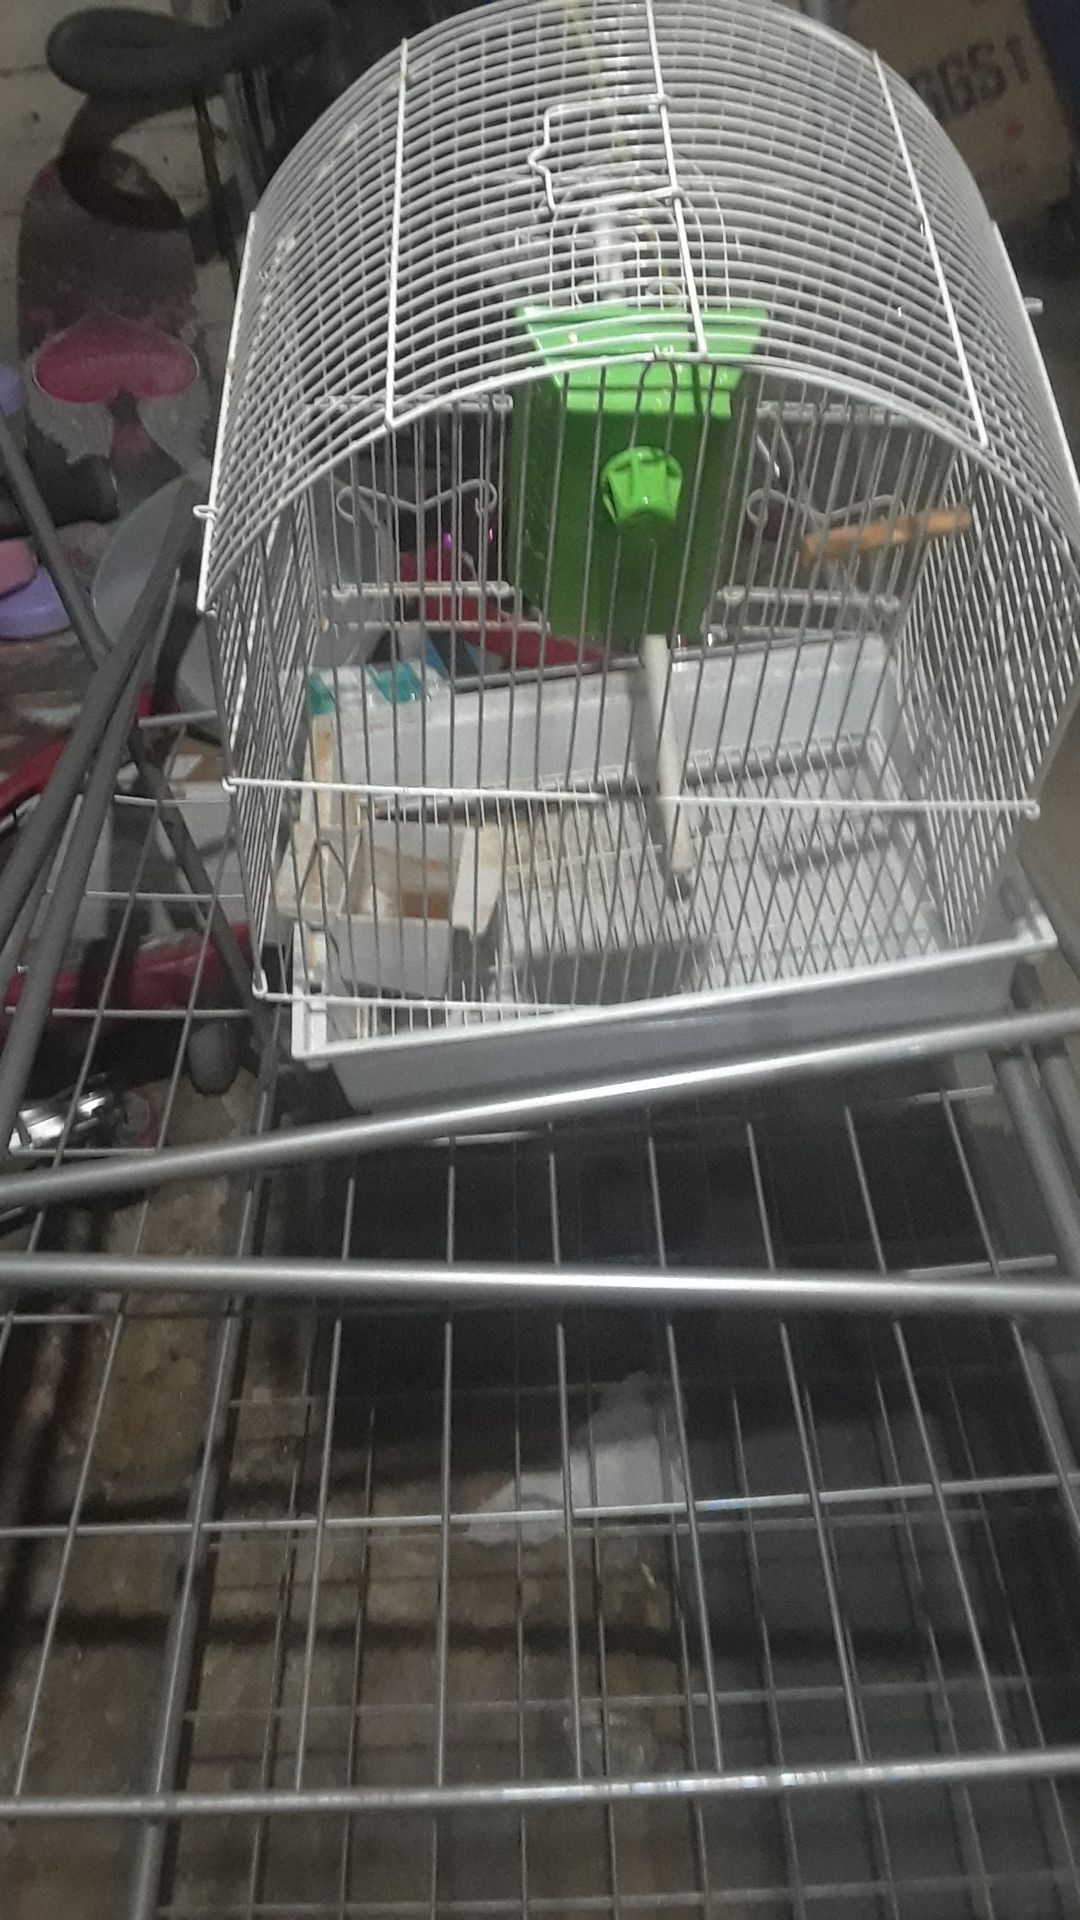 Birdcage new can fit two birds come freely has a mirror a poll they can stand on you can put paper under the cage and change it easily and a food bowl